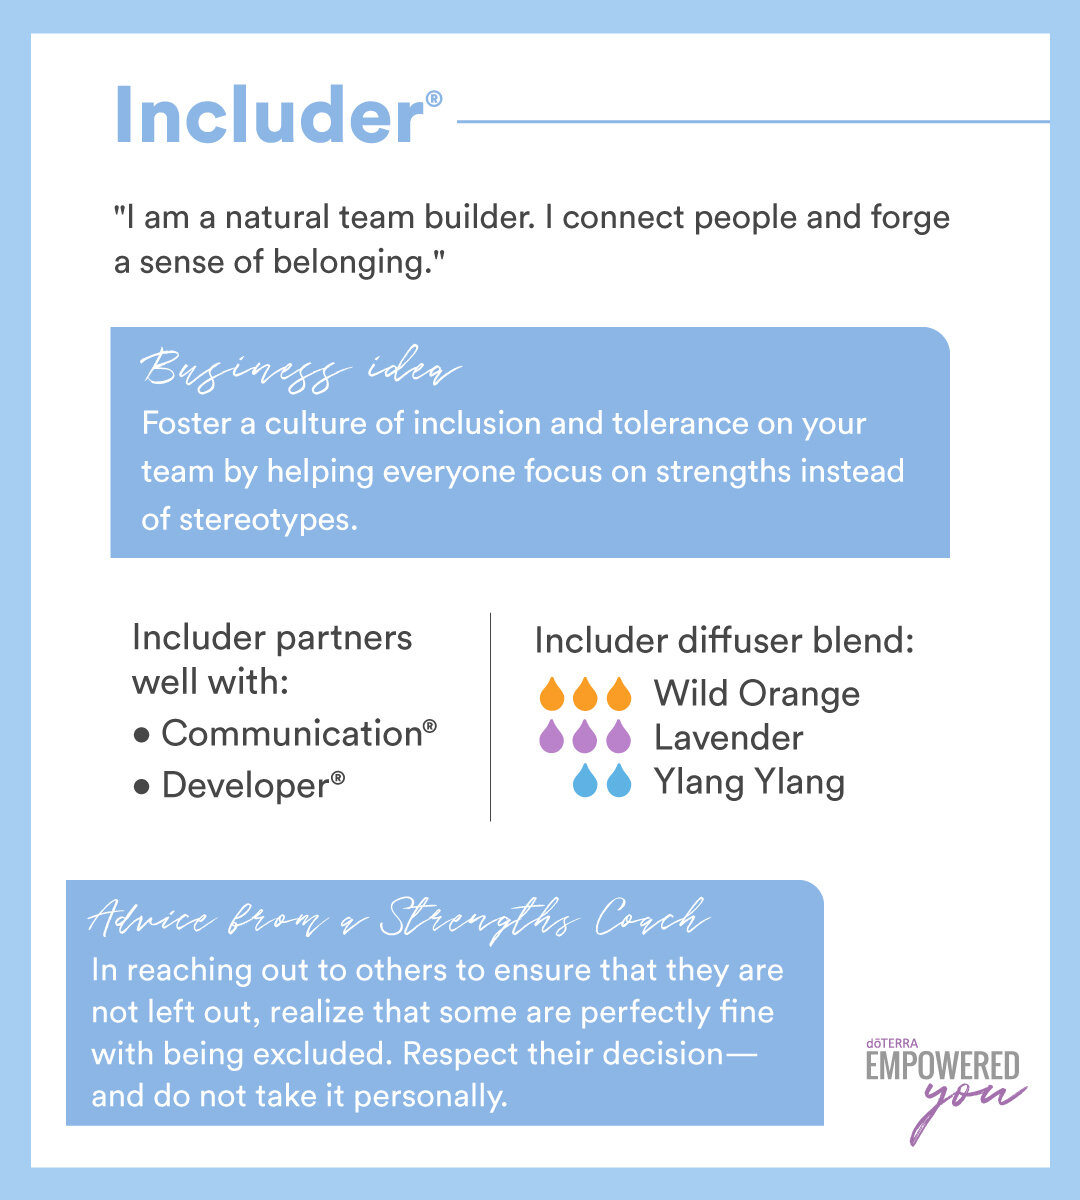 Strengths and oils-insight-Includer.jpg